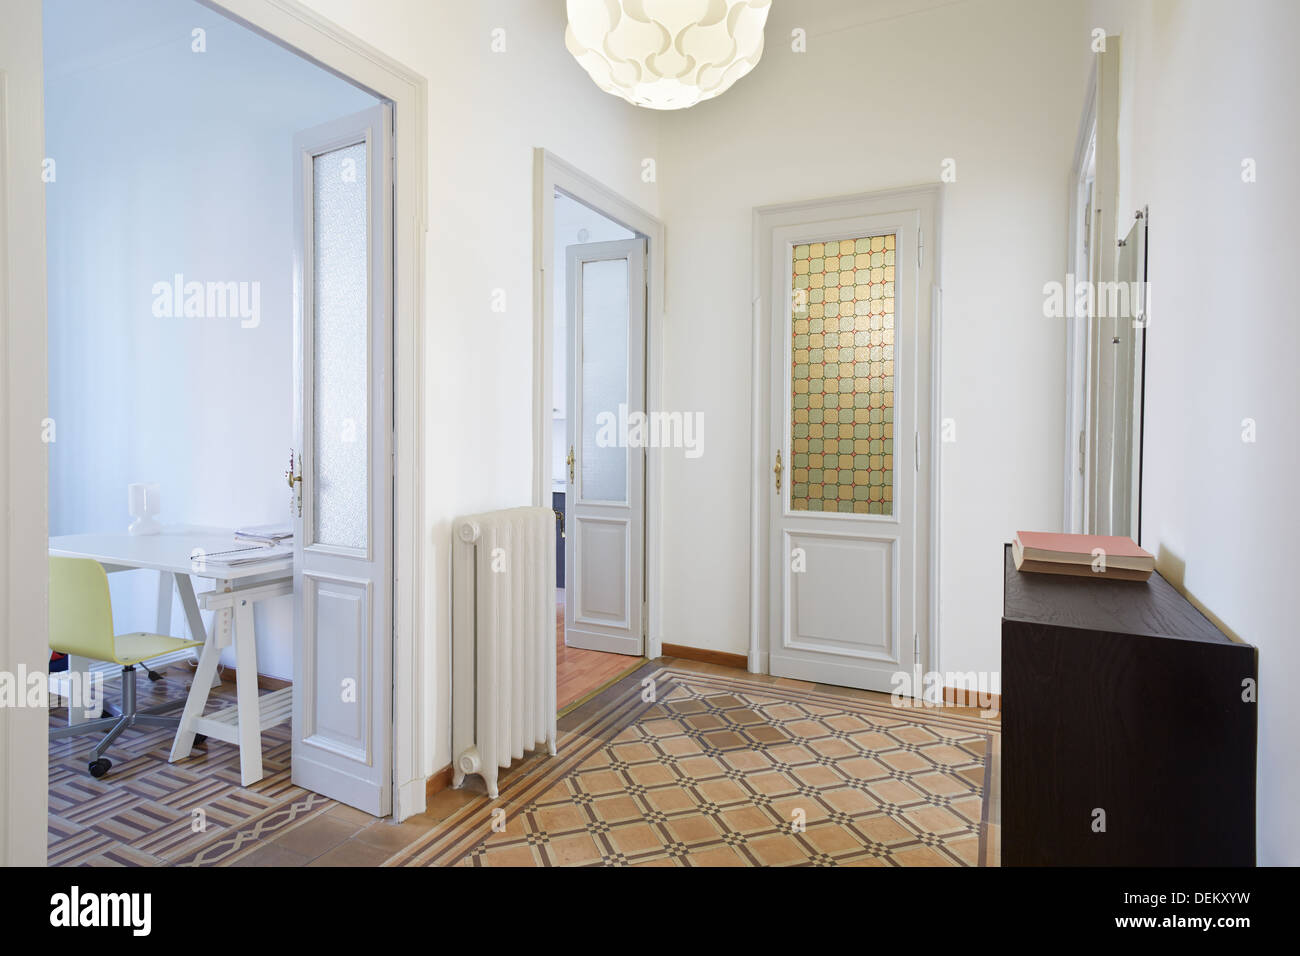 Apartment interior with hallway and rooms Stock Photo